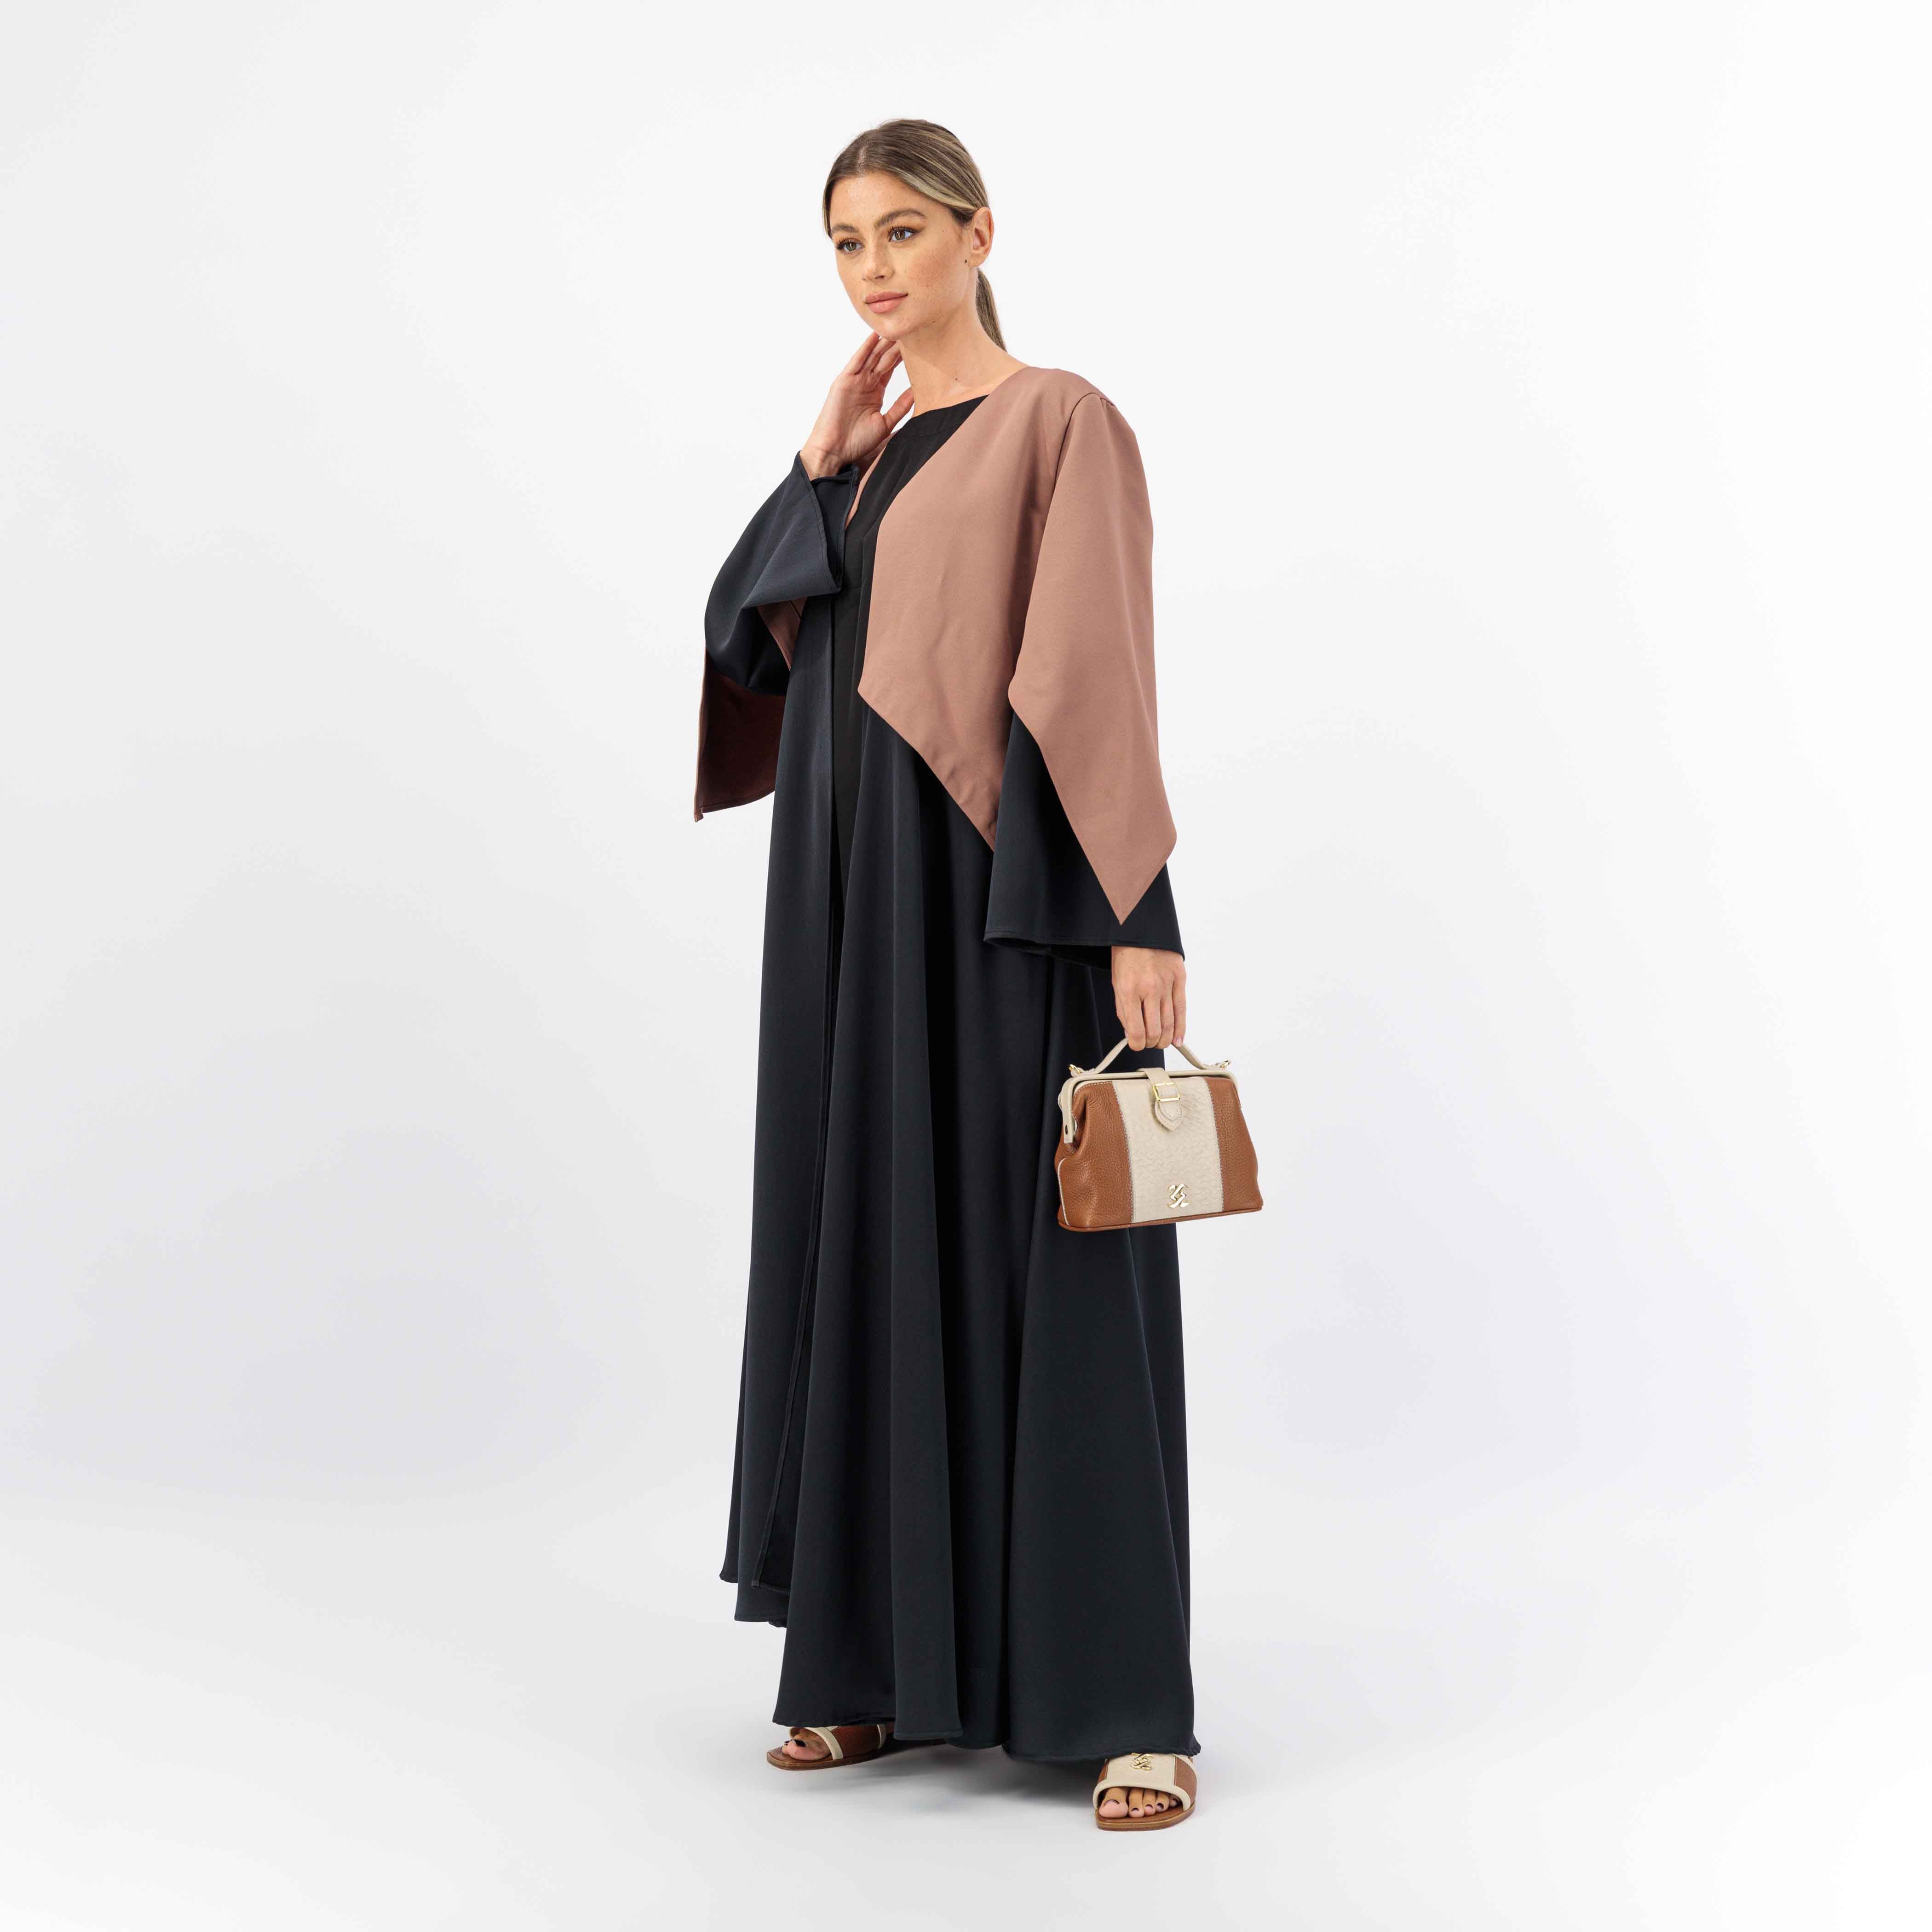 BLACK CREPE FABRIC ABAYA WITH TOP BATCH BROWN WOVEN FABRIC